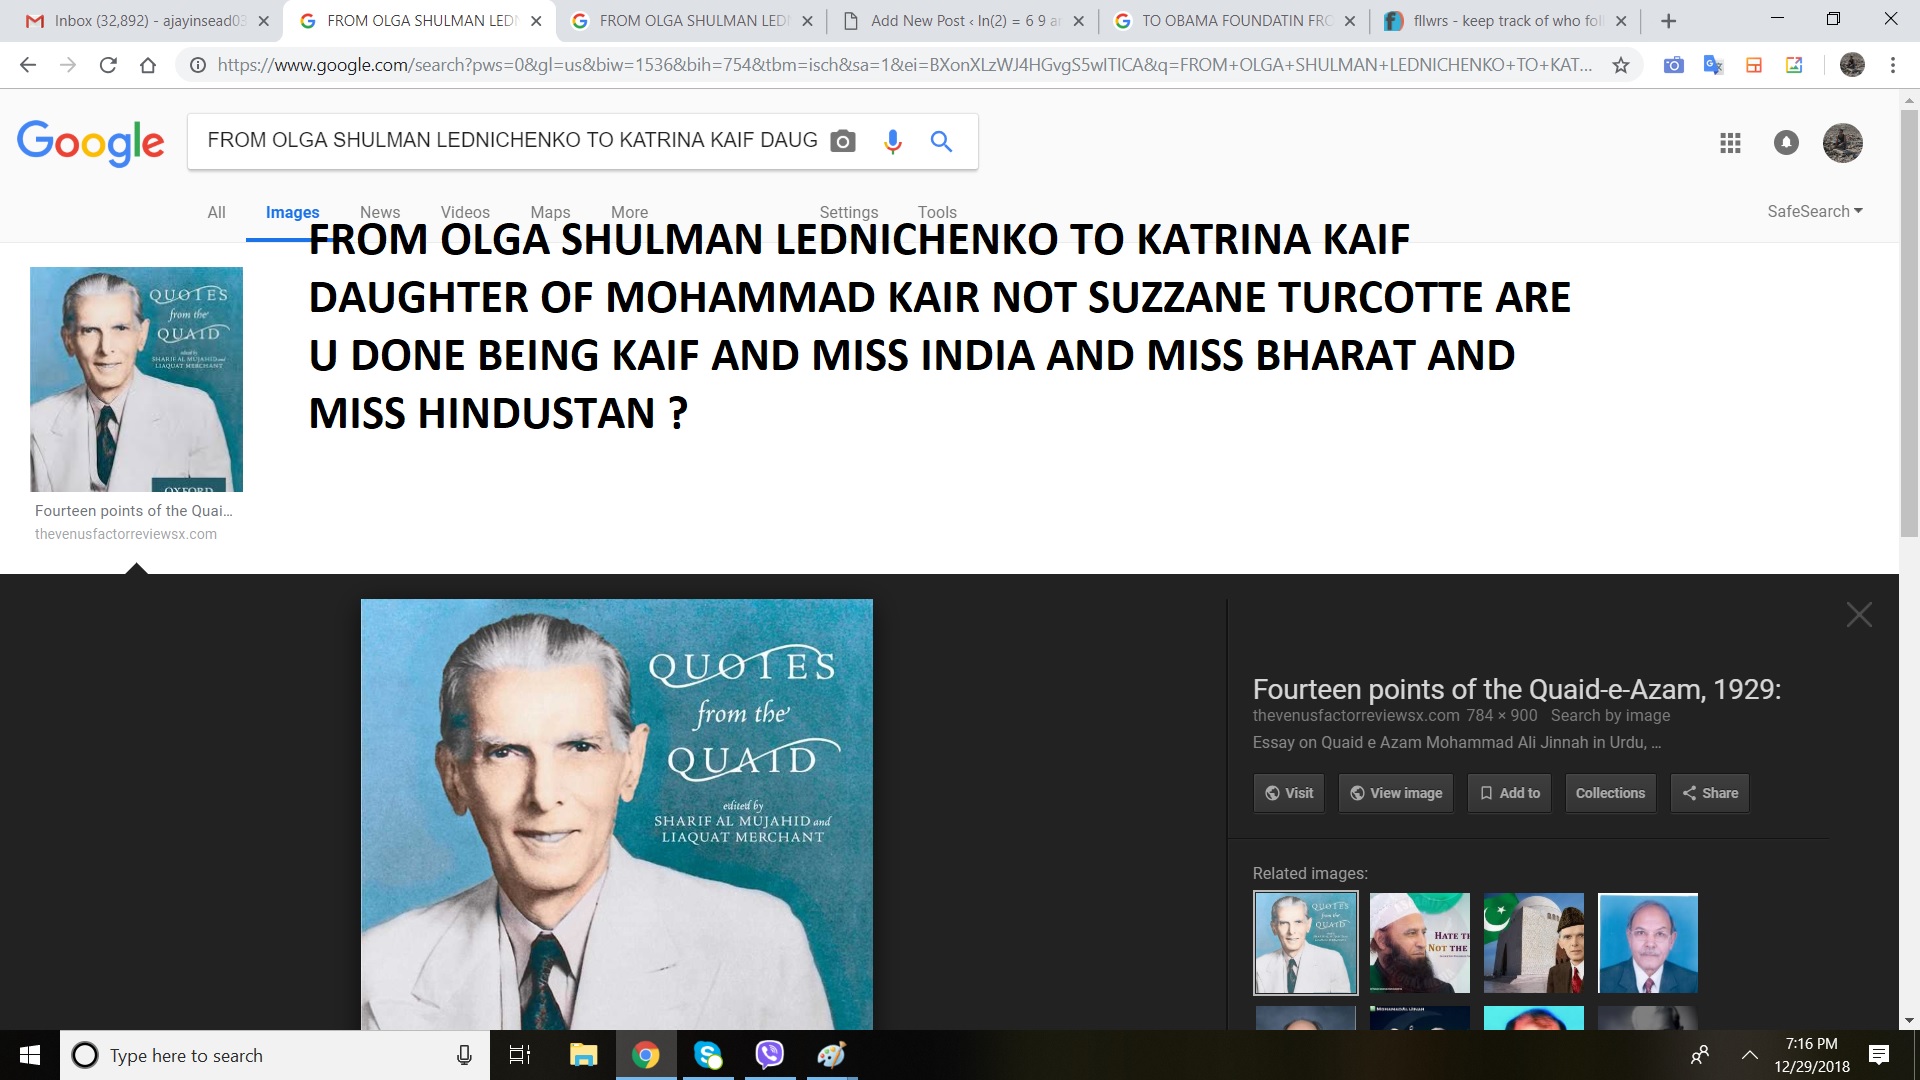 FROM OLGA SHULMAN LEDNICHENKO TO KATRINA KAIF DAUGHTER OF MOHAMMAD KAIR NOT SUZZANE TURCOTTE ARE U DONE BEING KAIF AND MISS INDIA AND MISS CHARAT AND MISS HINDUSTAN